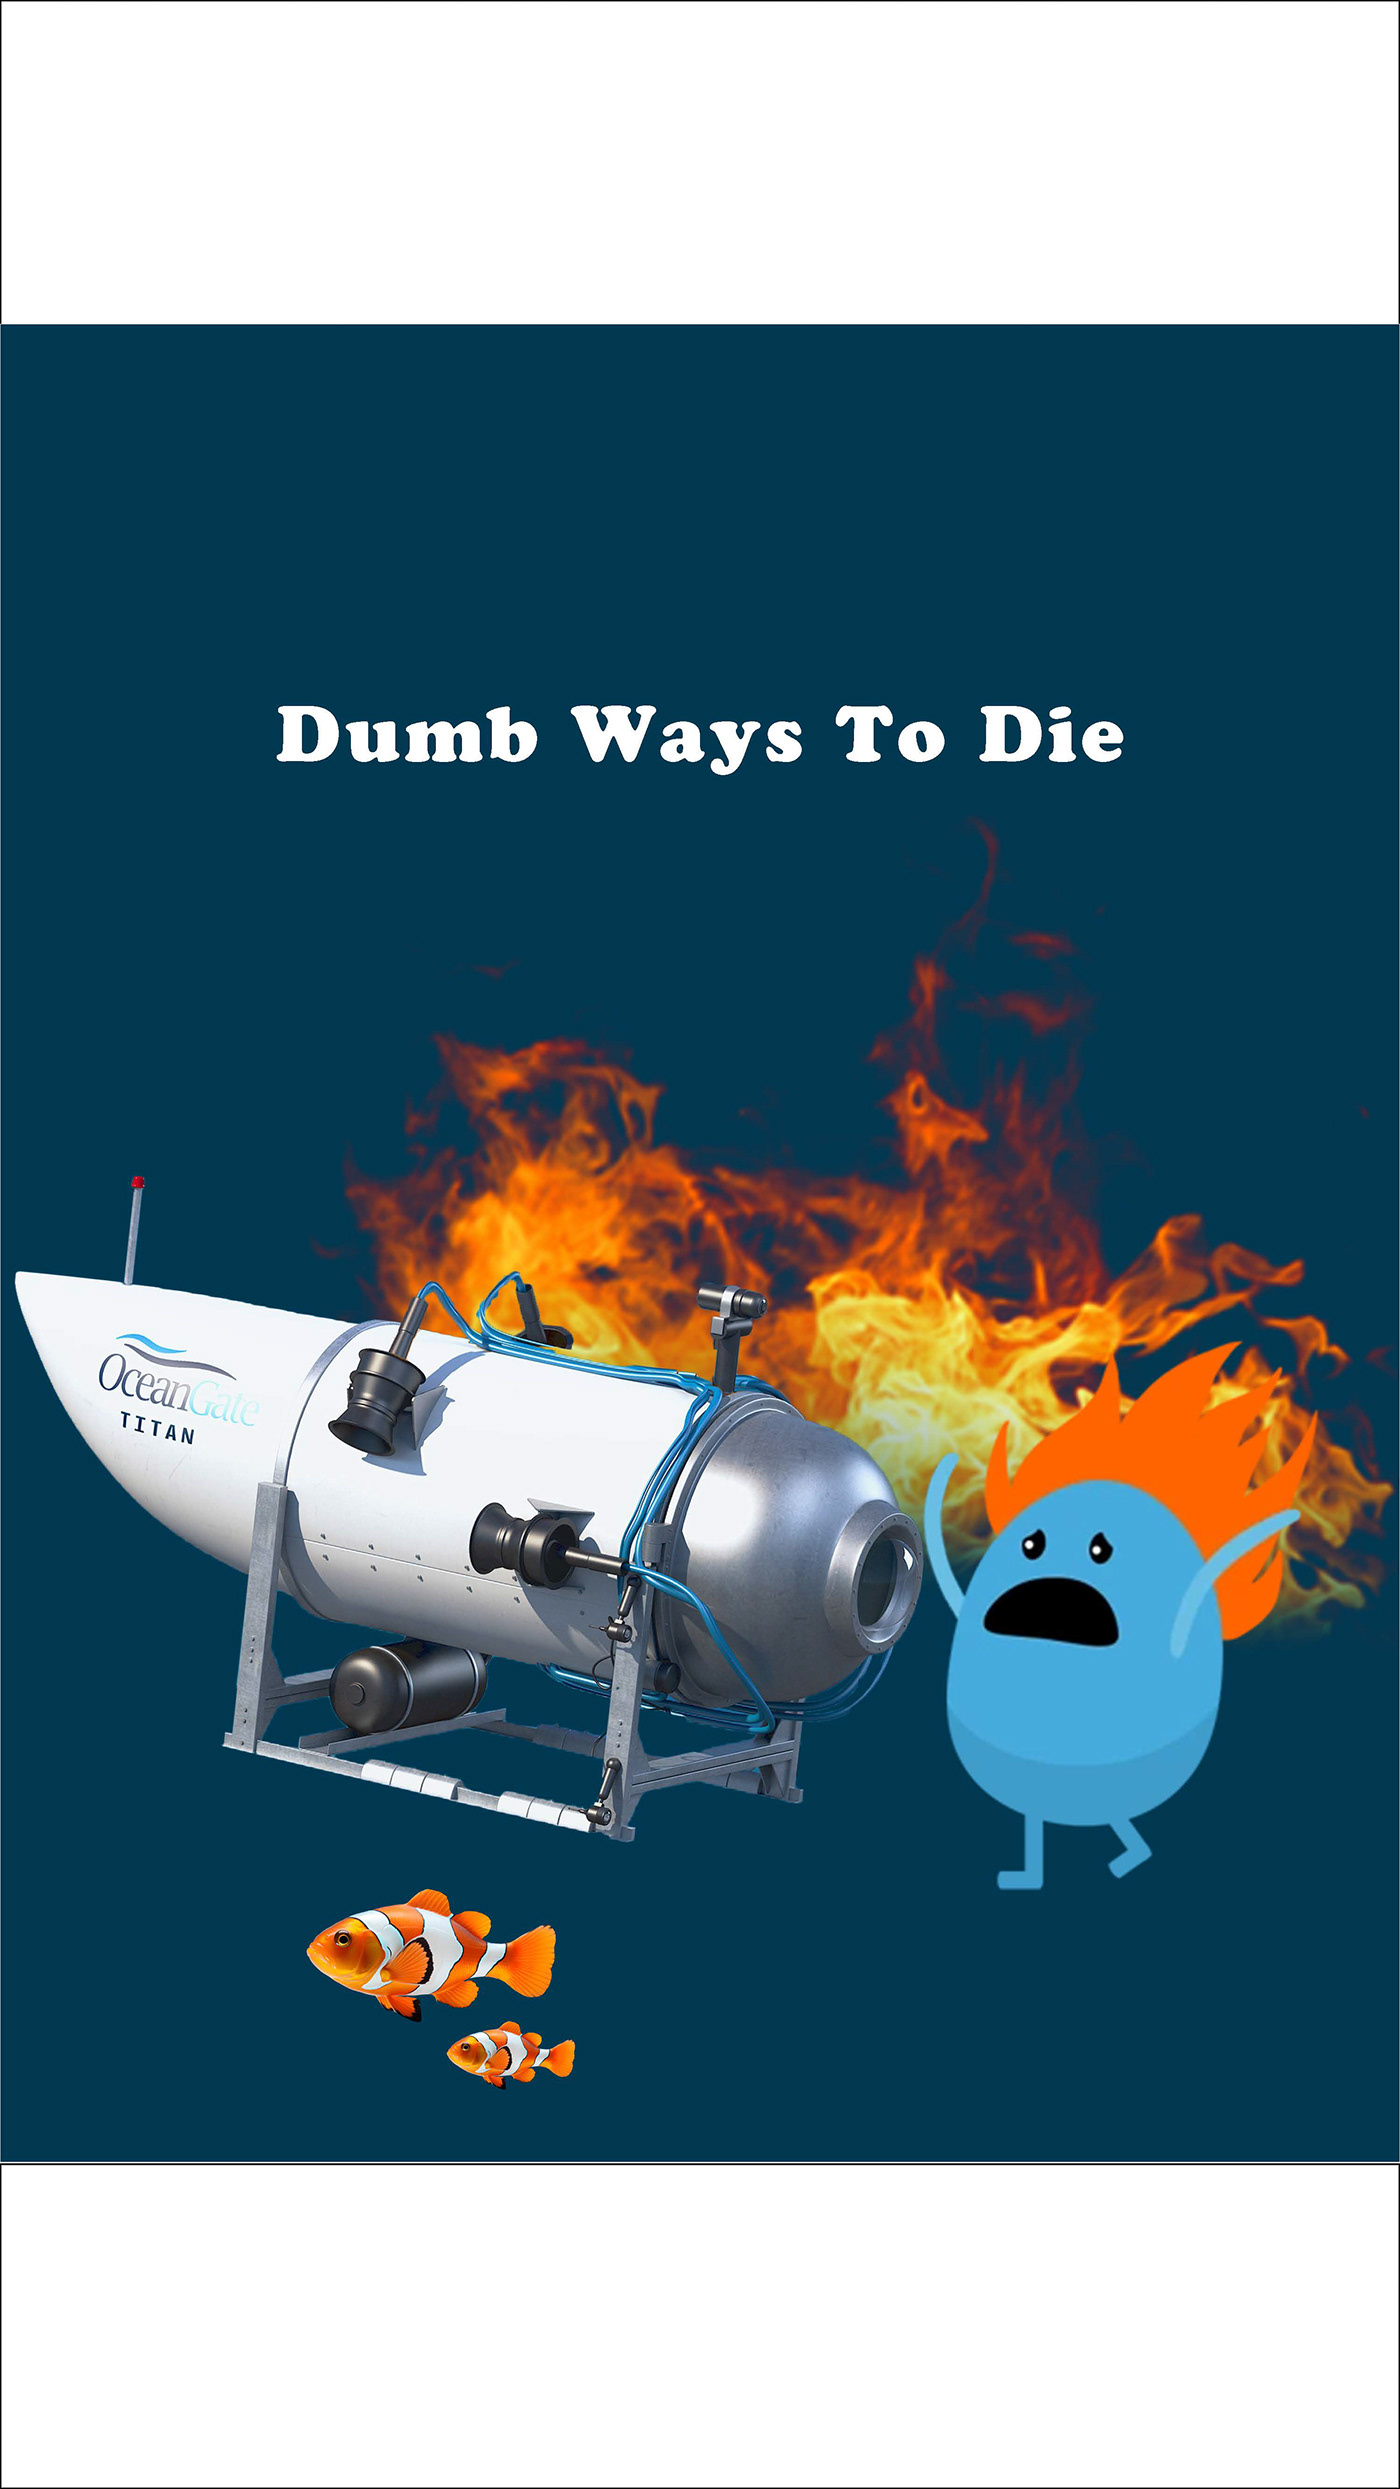 dumbwaystodie campaign poster Poster Design